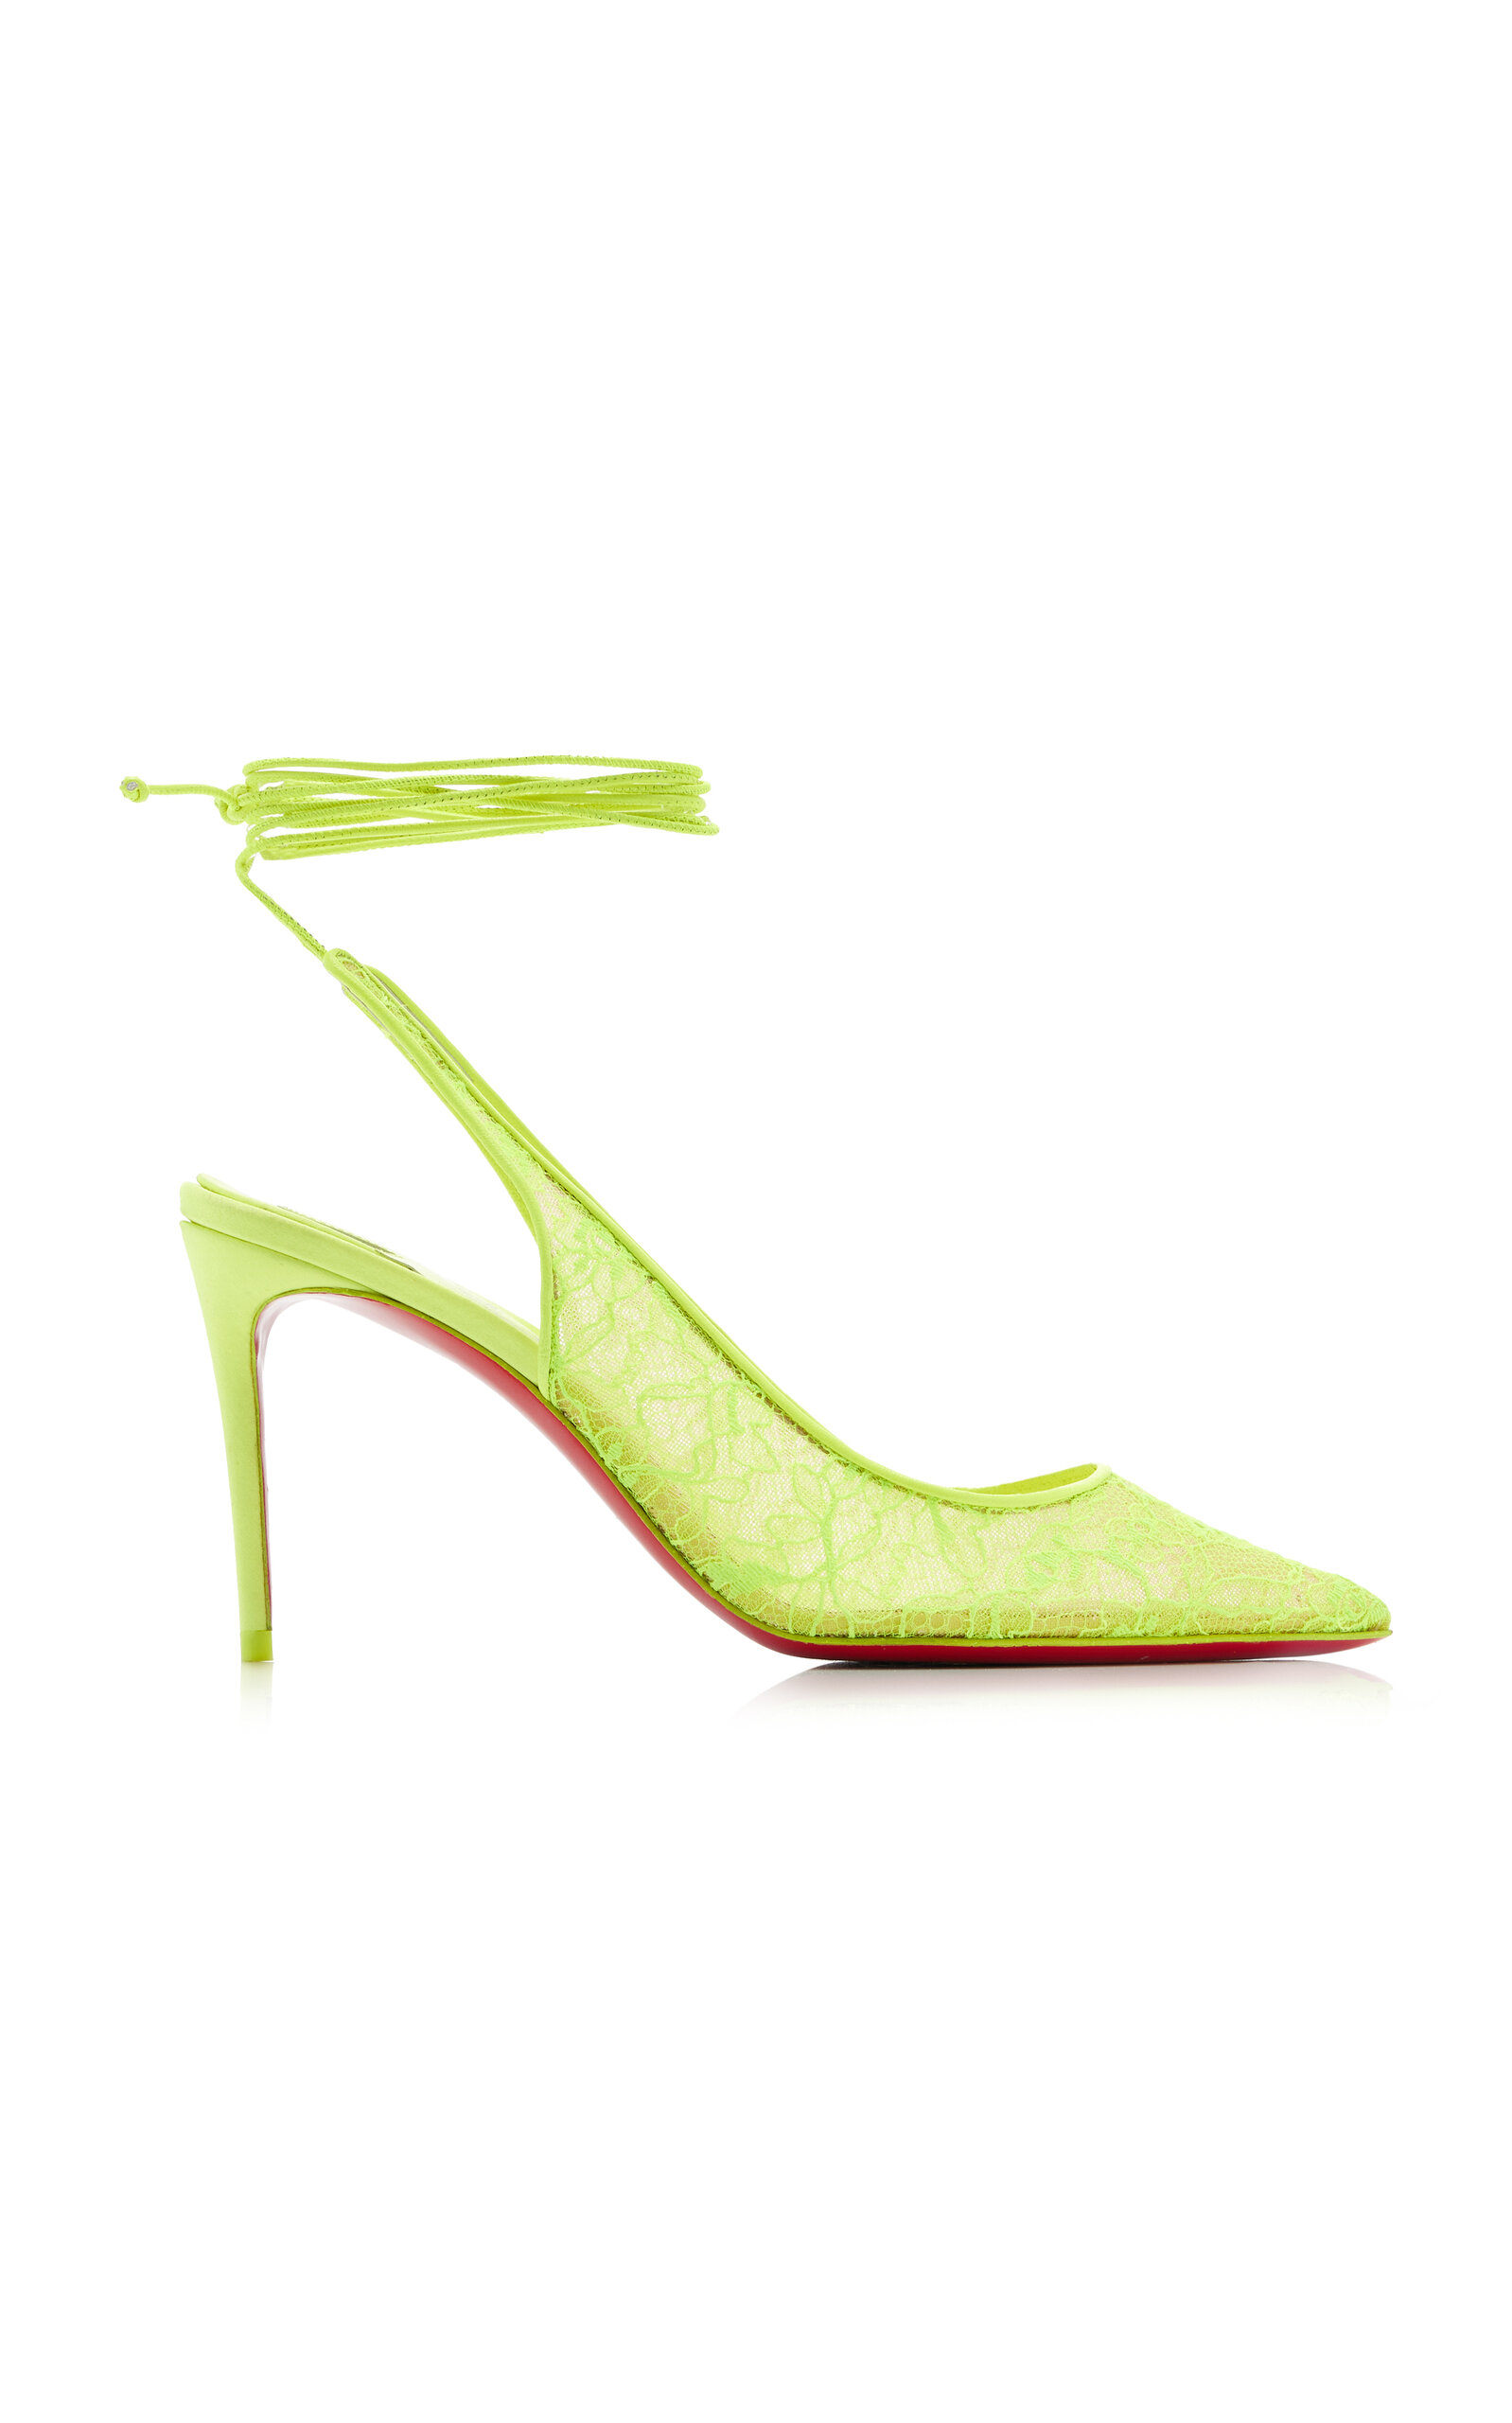 https://www.modaoperandi.com/assets/images/products/923848/559289/large_christian-louboutin-yellow-lace-up-kate-85-rete-fluo-dentelle-lin.jpg?_t=1673042318